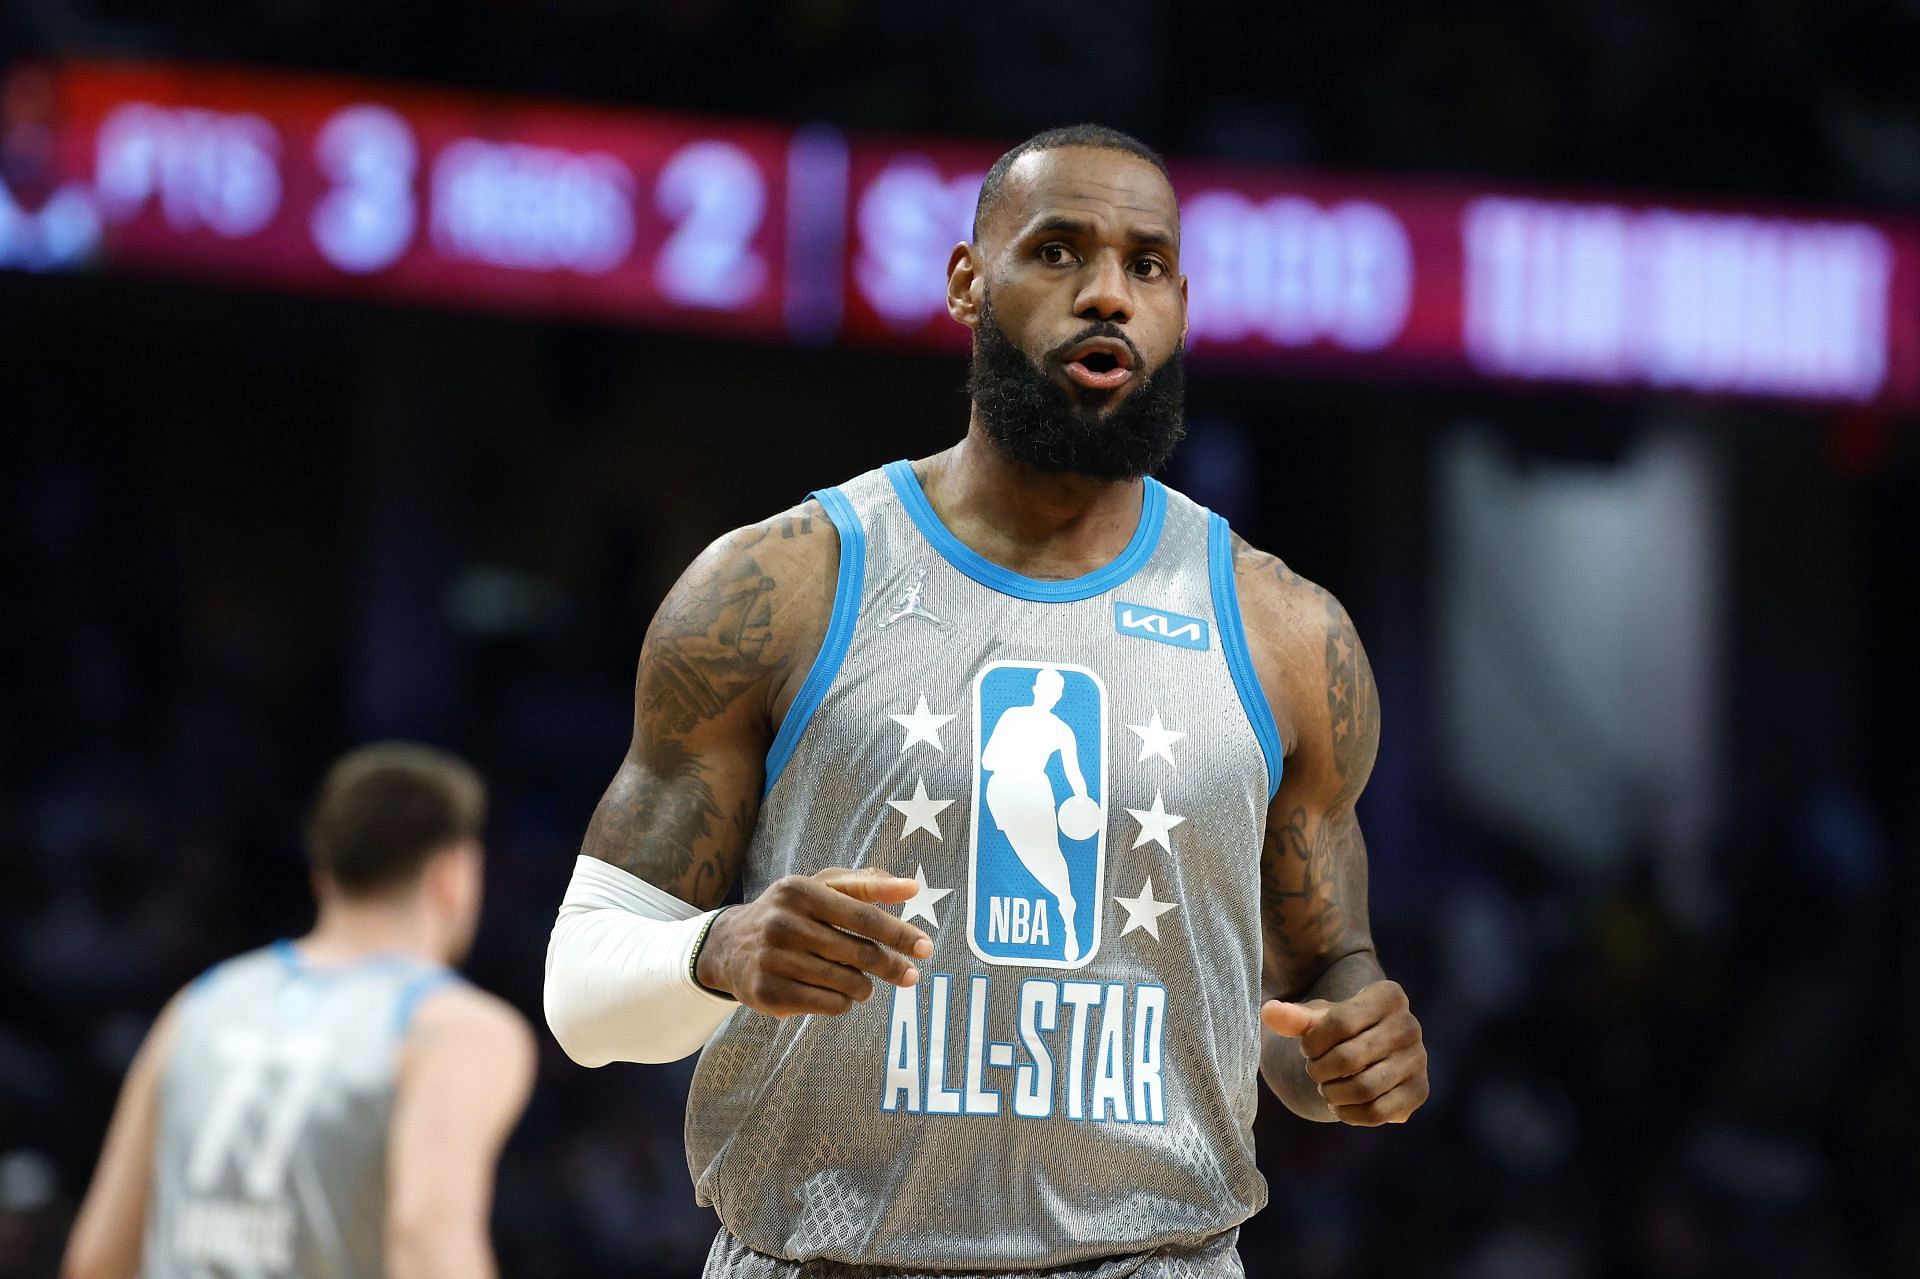 2022 NBA All-Star Game: LeBron James in his 18th All-Star game